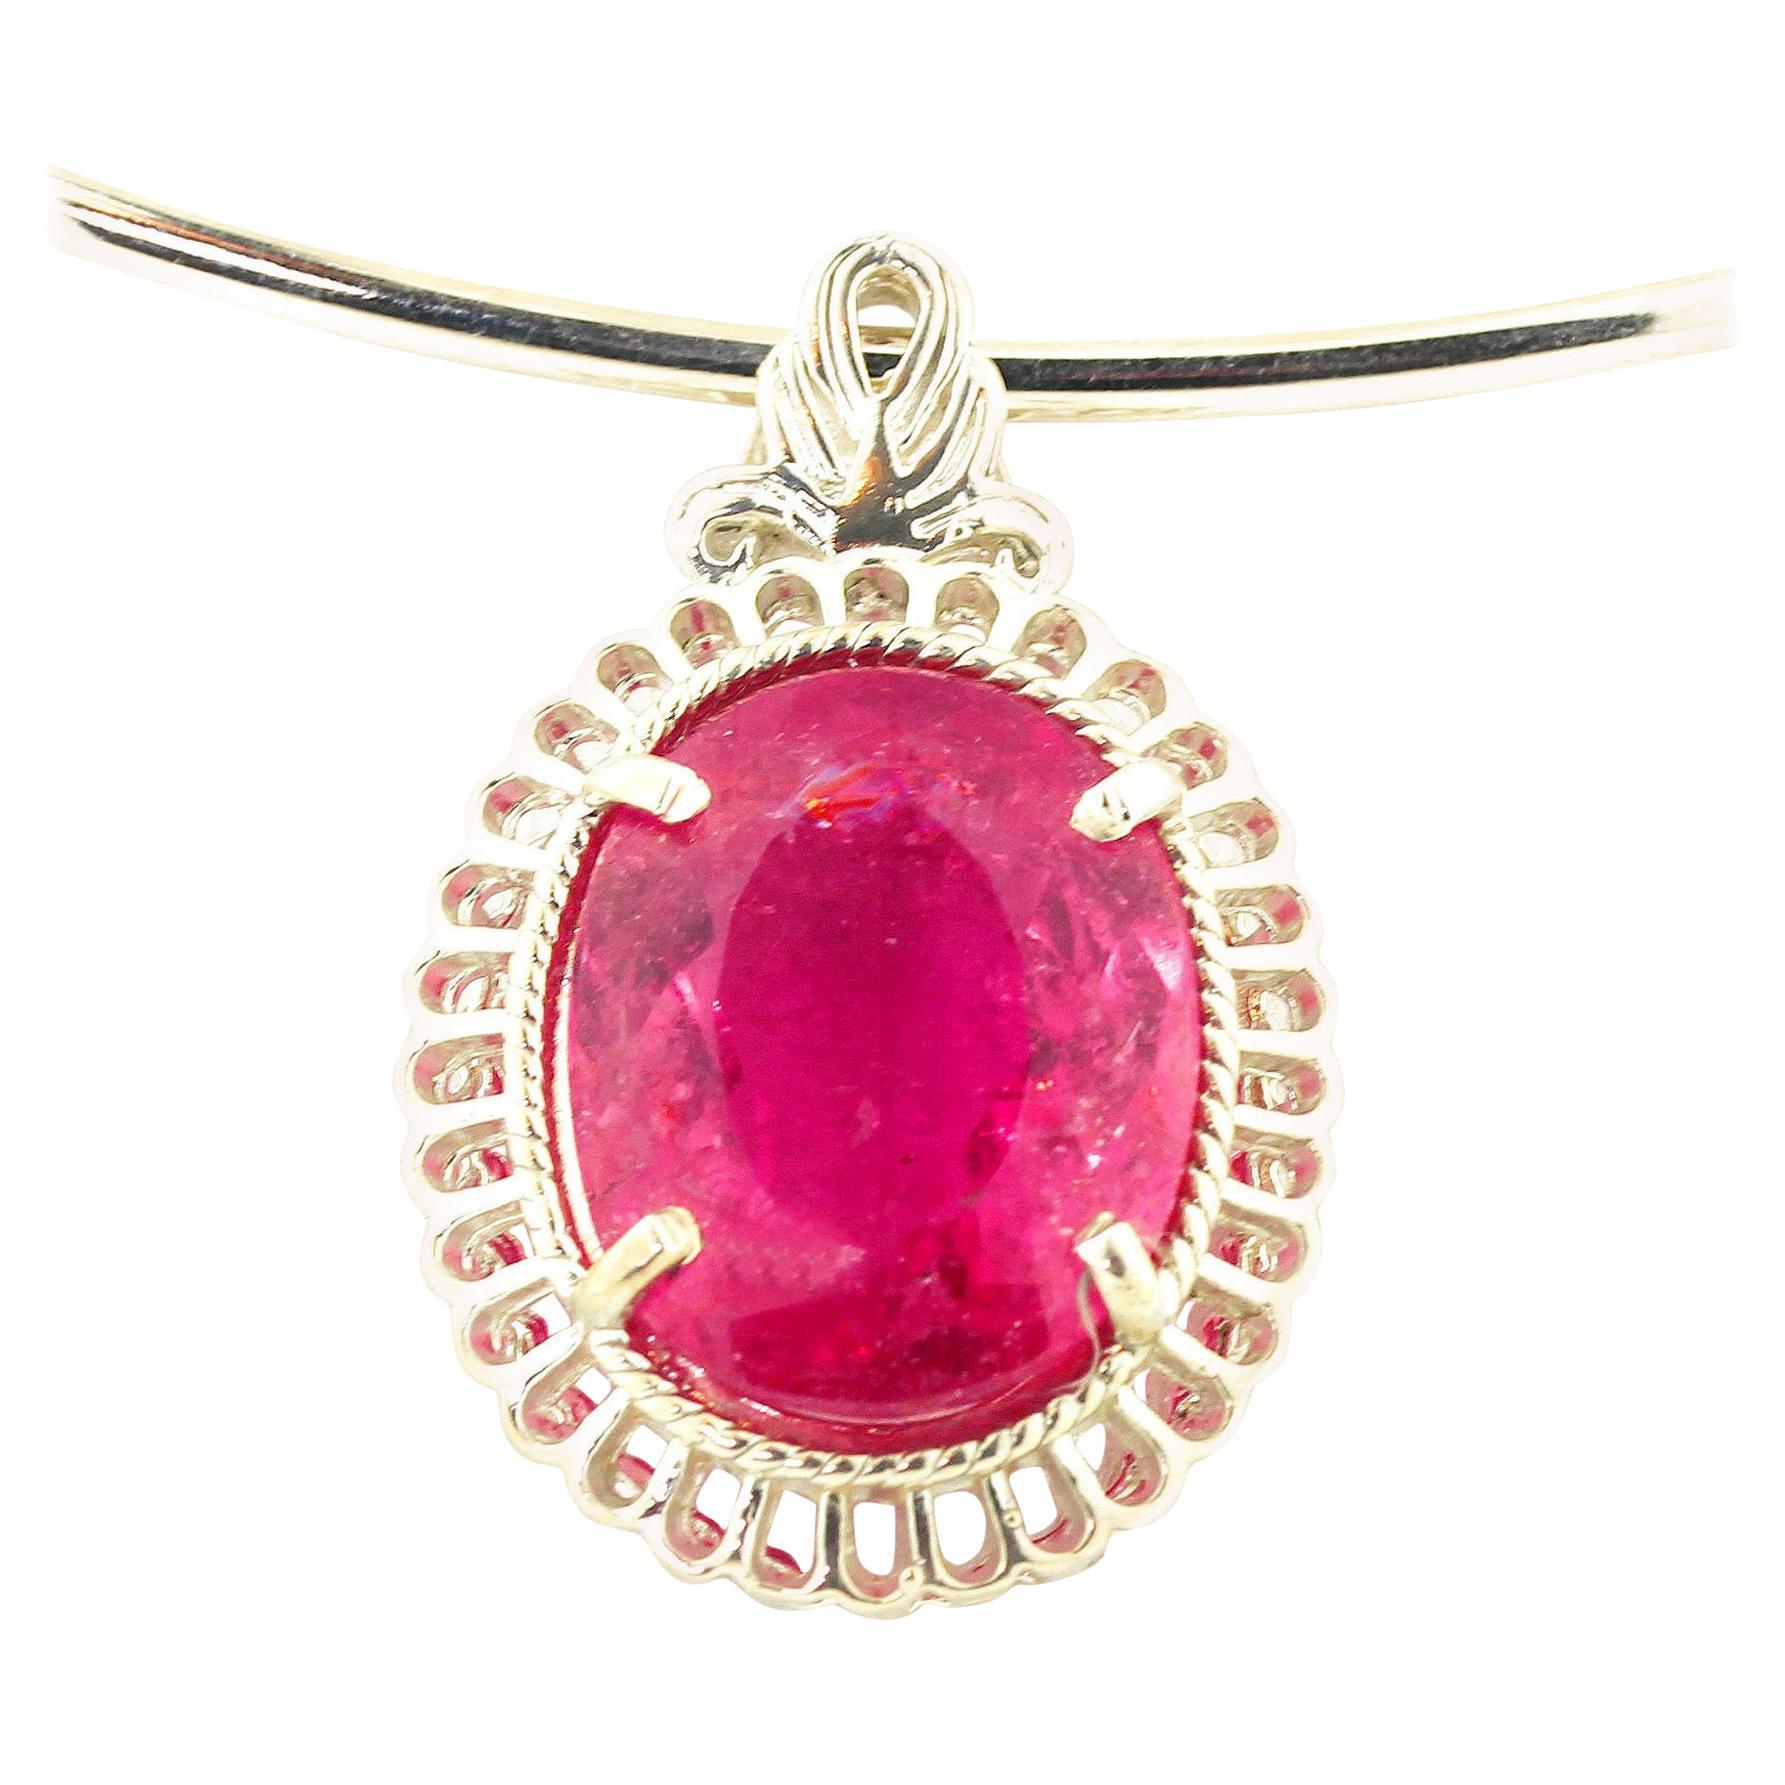 AJD Absolutely Stunning 15 Ct Unique Tourmaline Sterling Silver Pendant For Sale